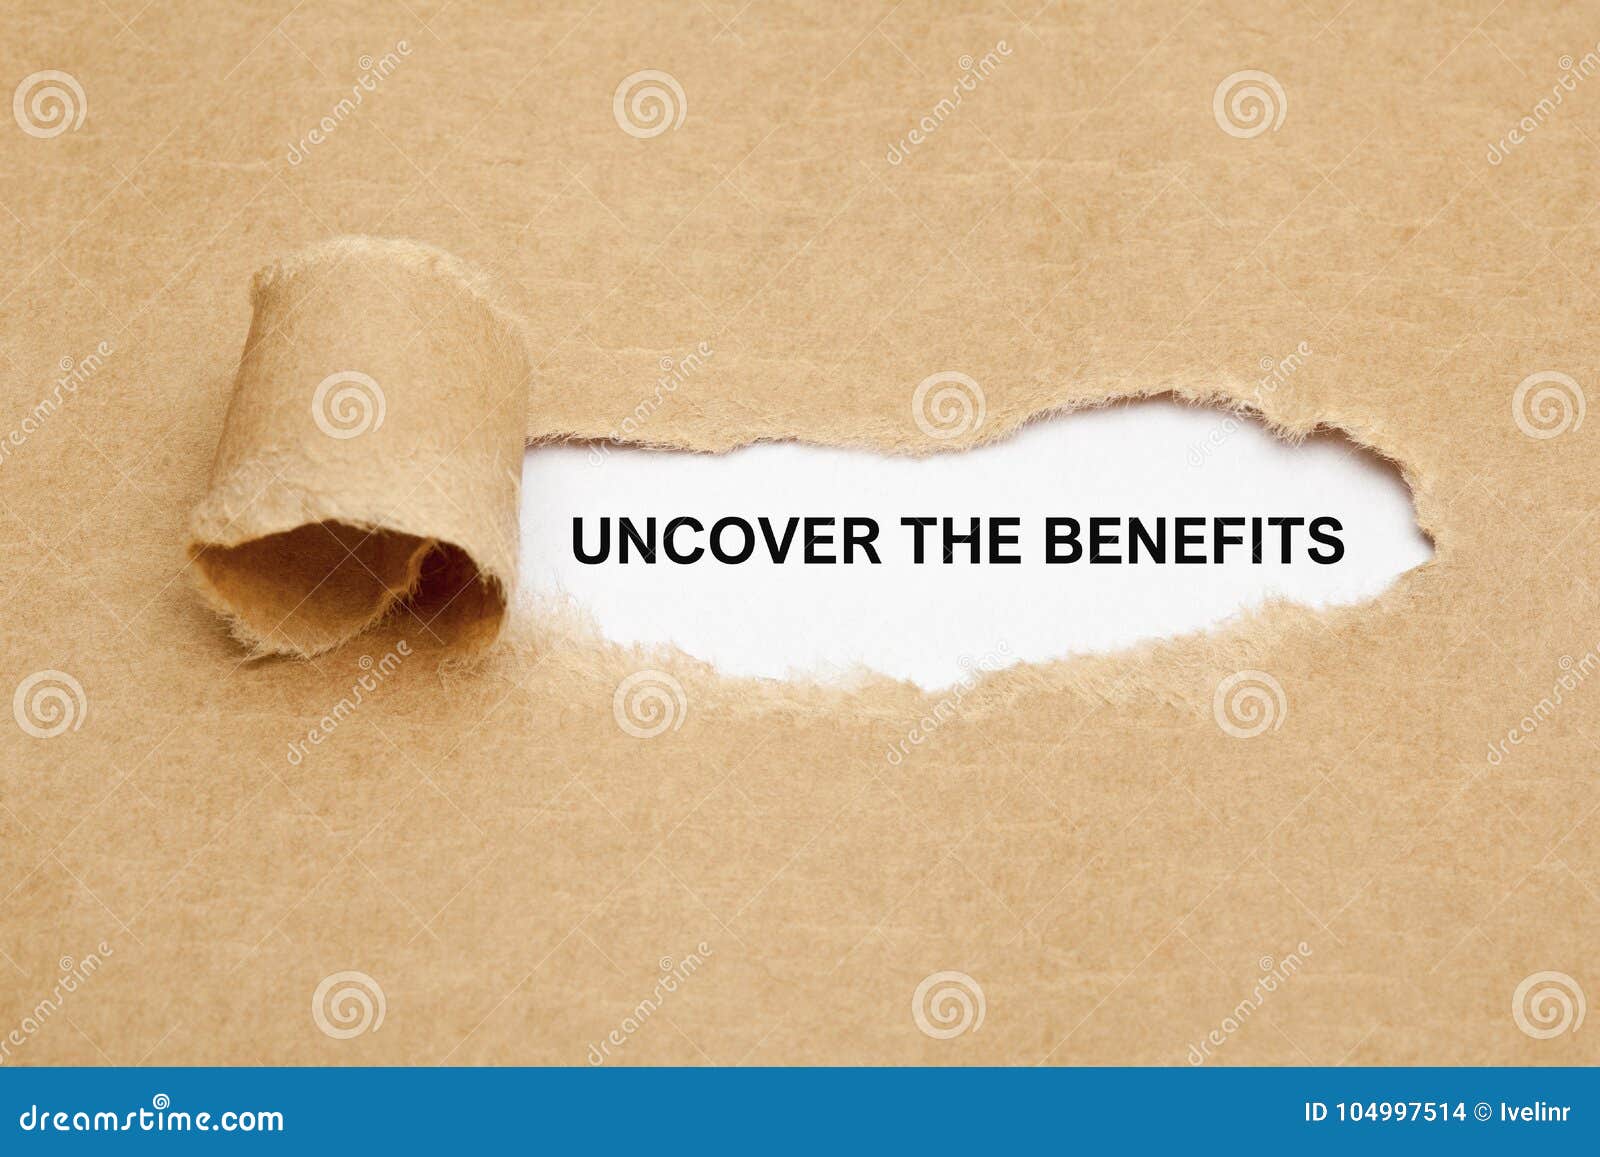 uncover the benefits torn paper